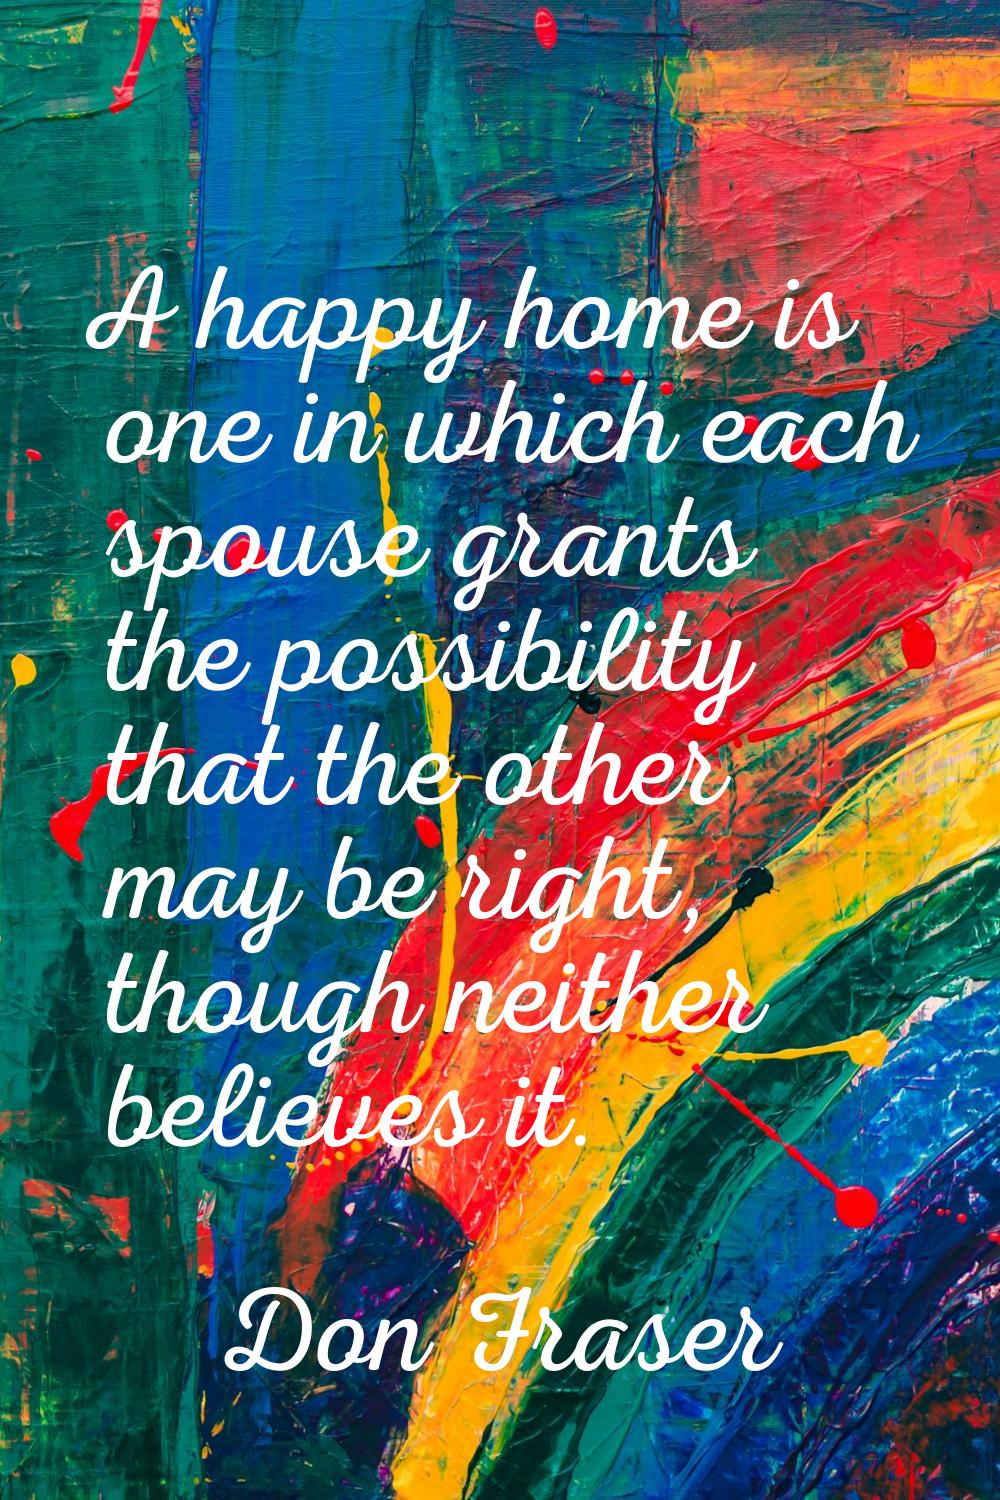 A happy home is one in which each spouse grants the possibility that the other may be right, though